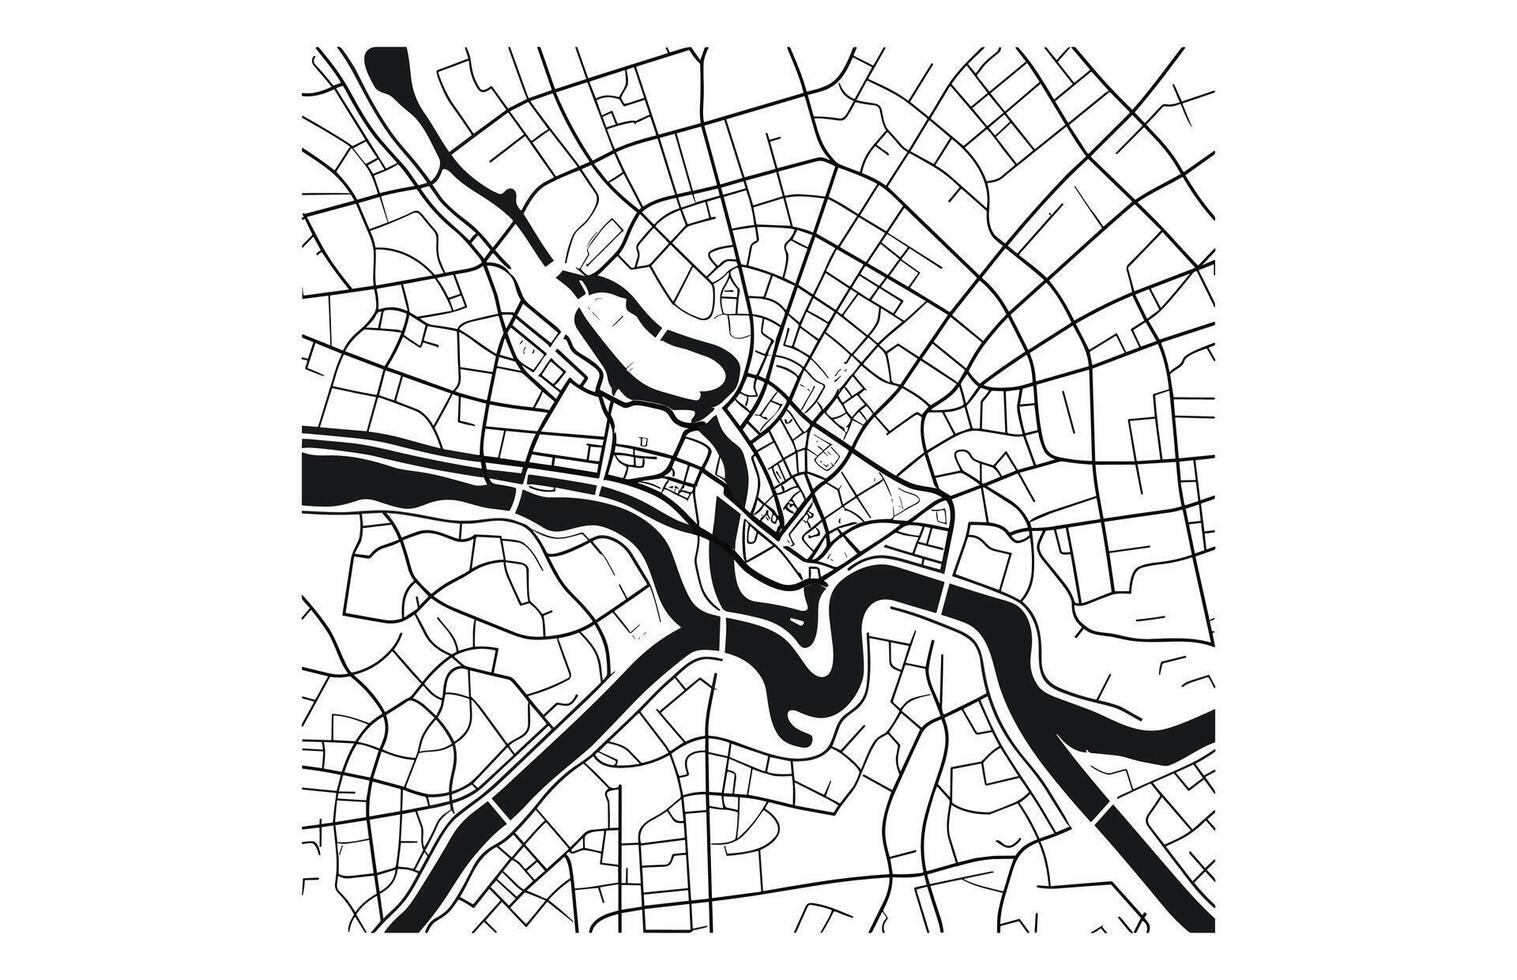 Black and white vector city map of London with well organized separated layers.